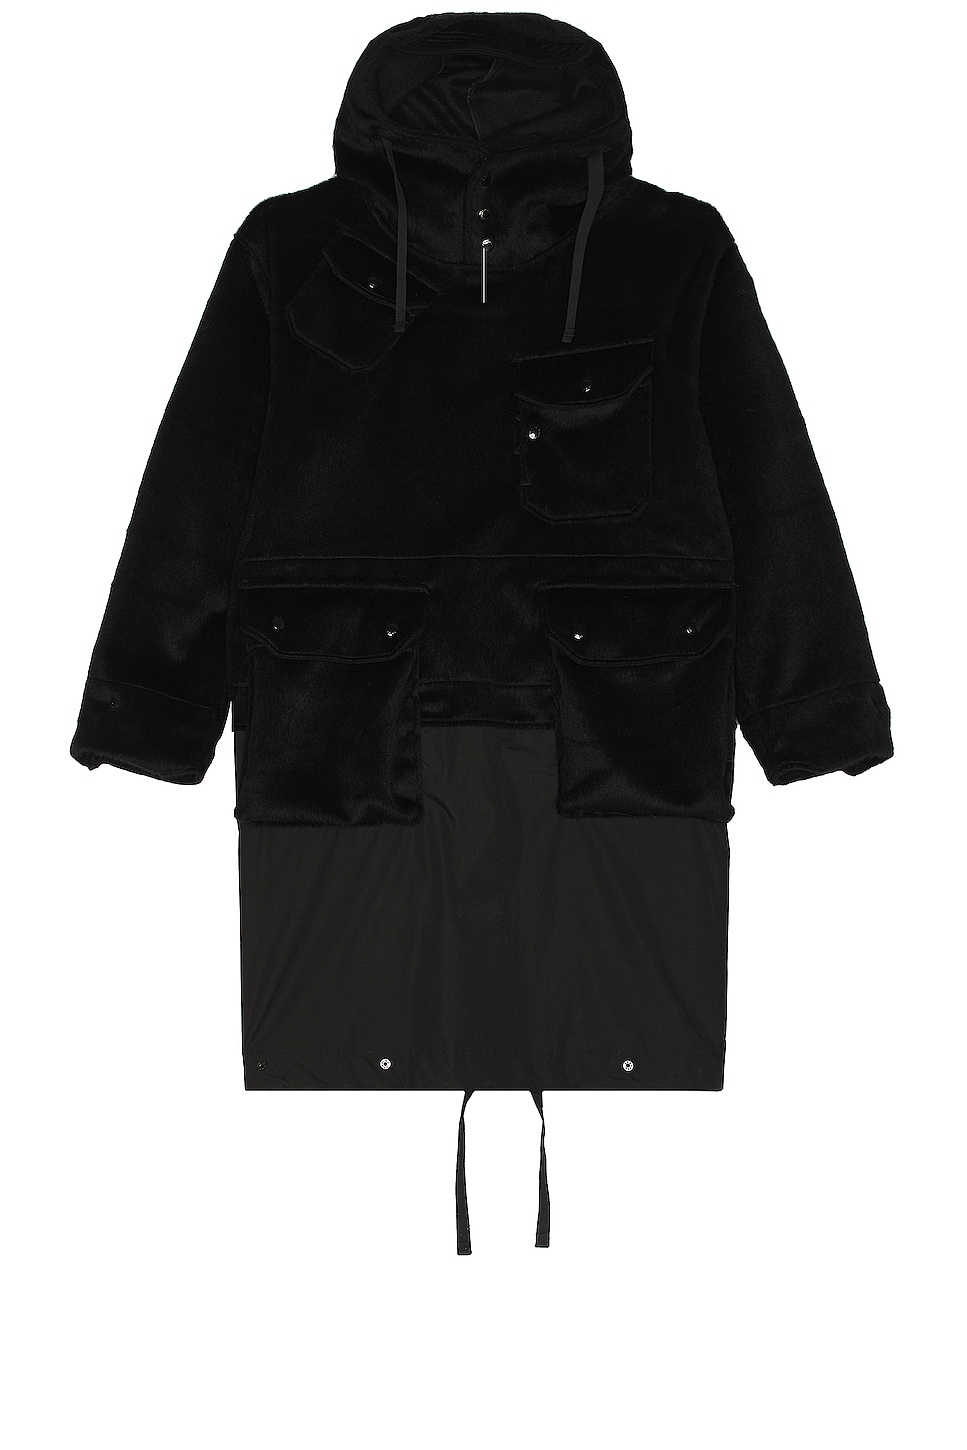 Image 1 of Engineered Garments Over Parka in Black